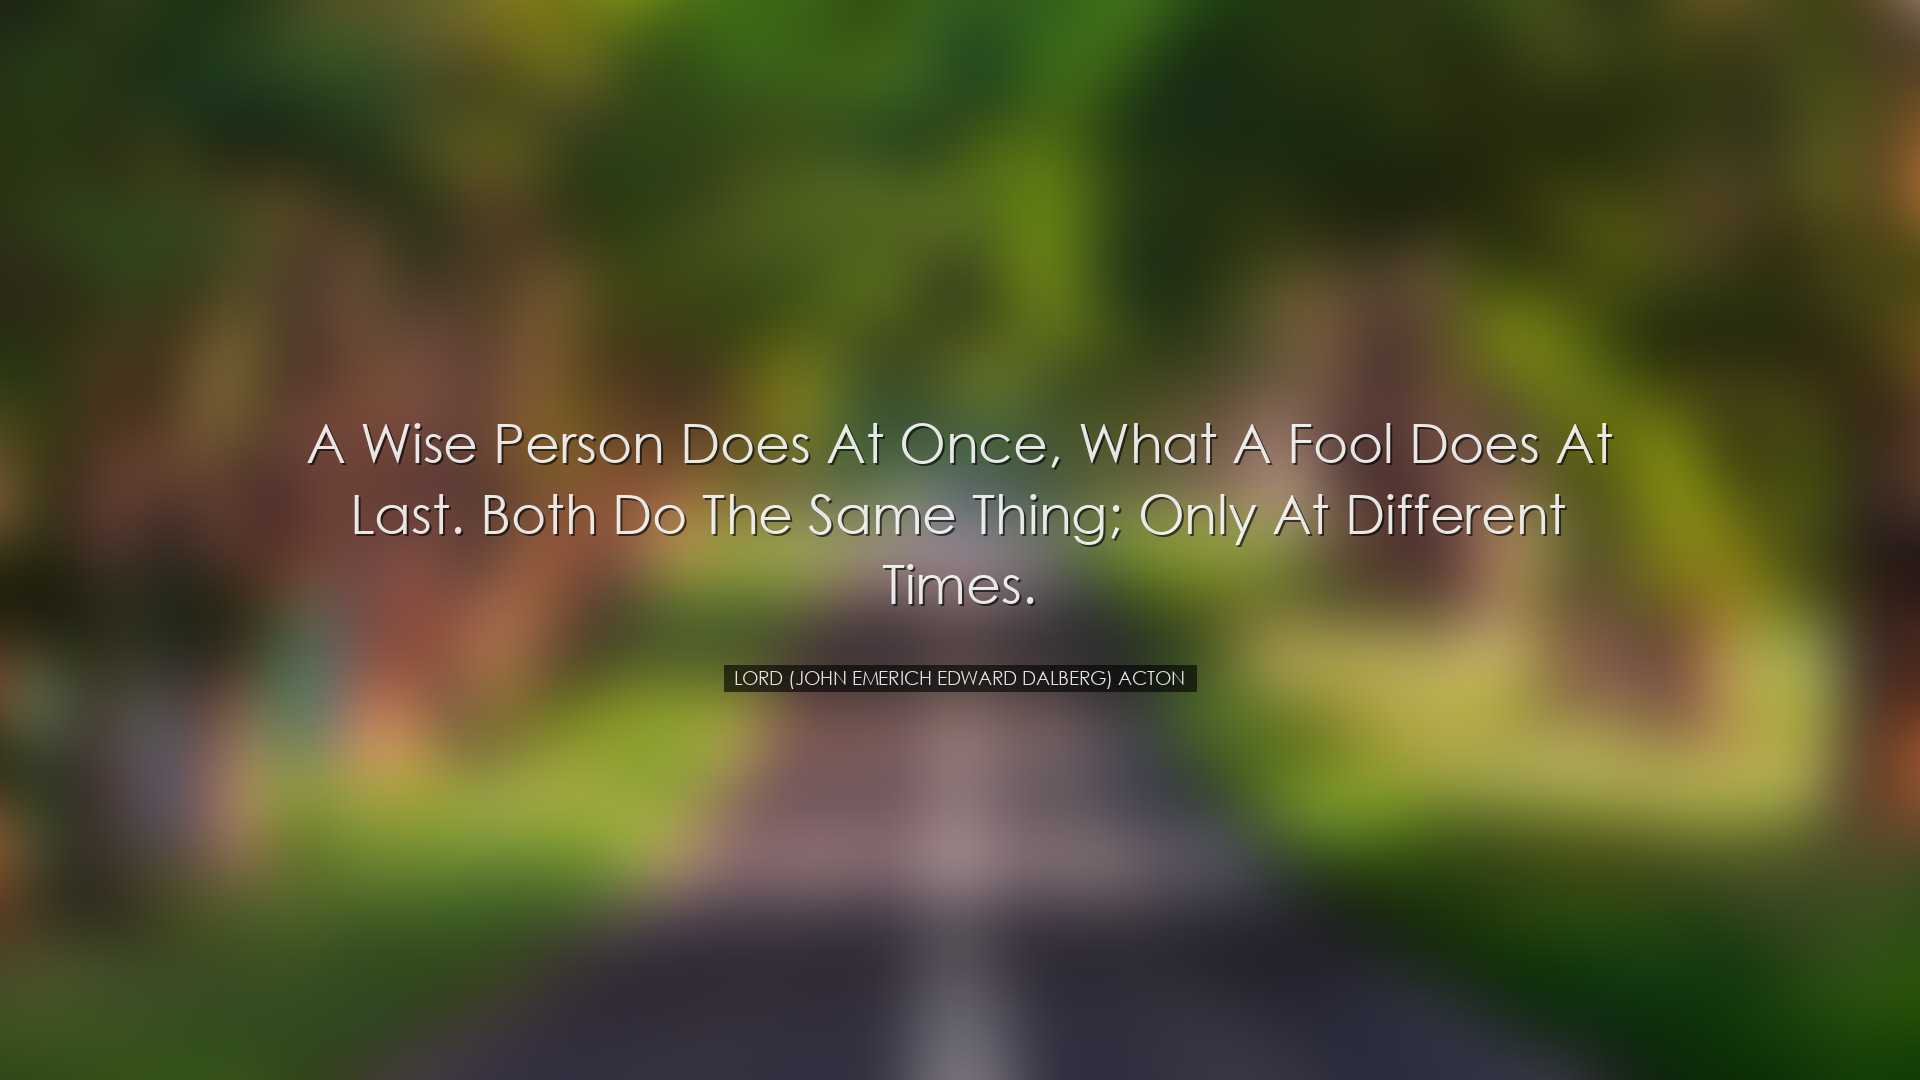 A wise person does at once, what a fool does at last. Both do the